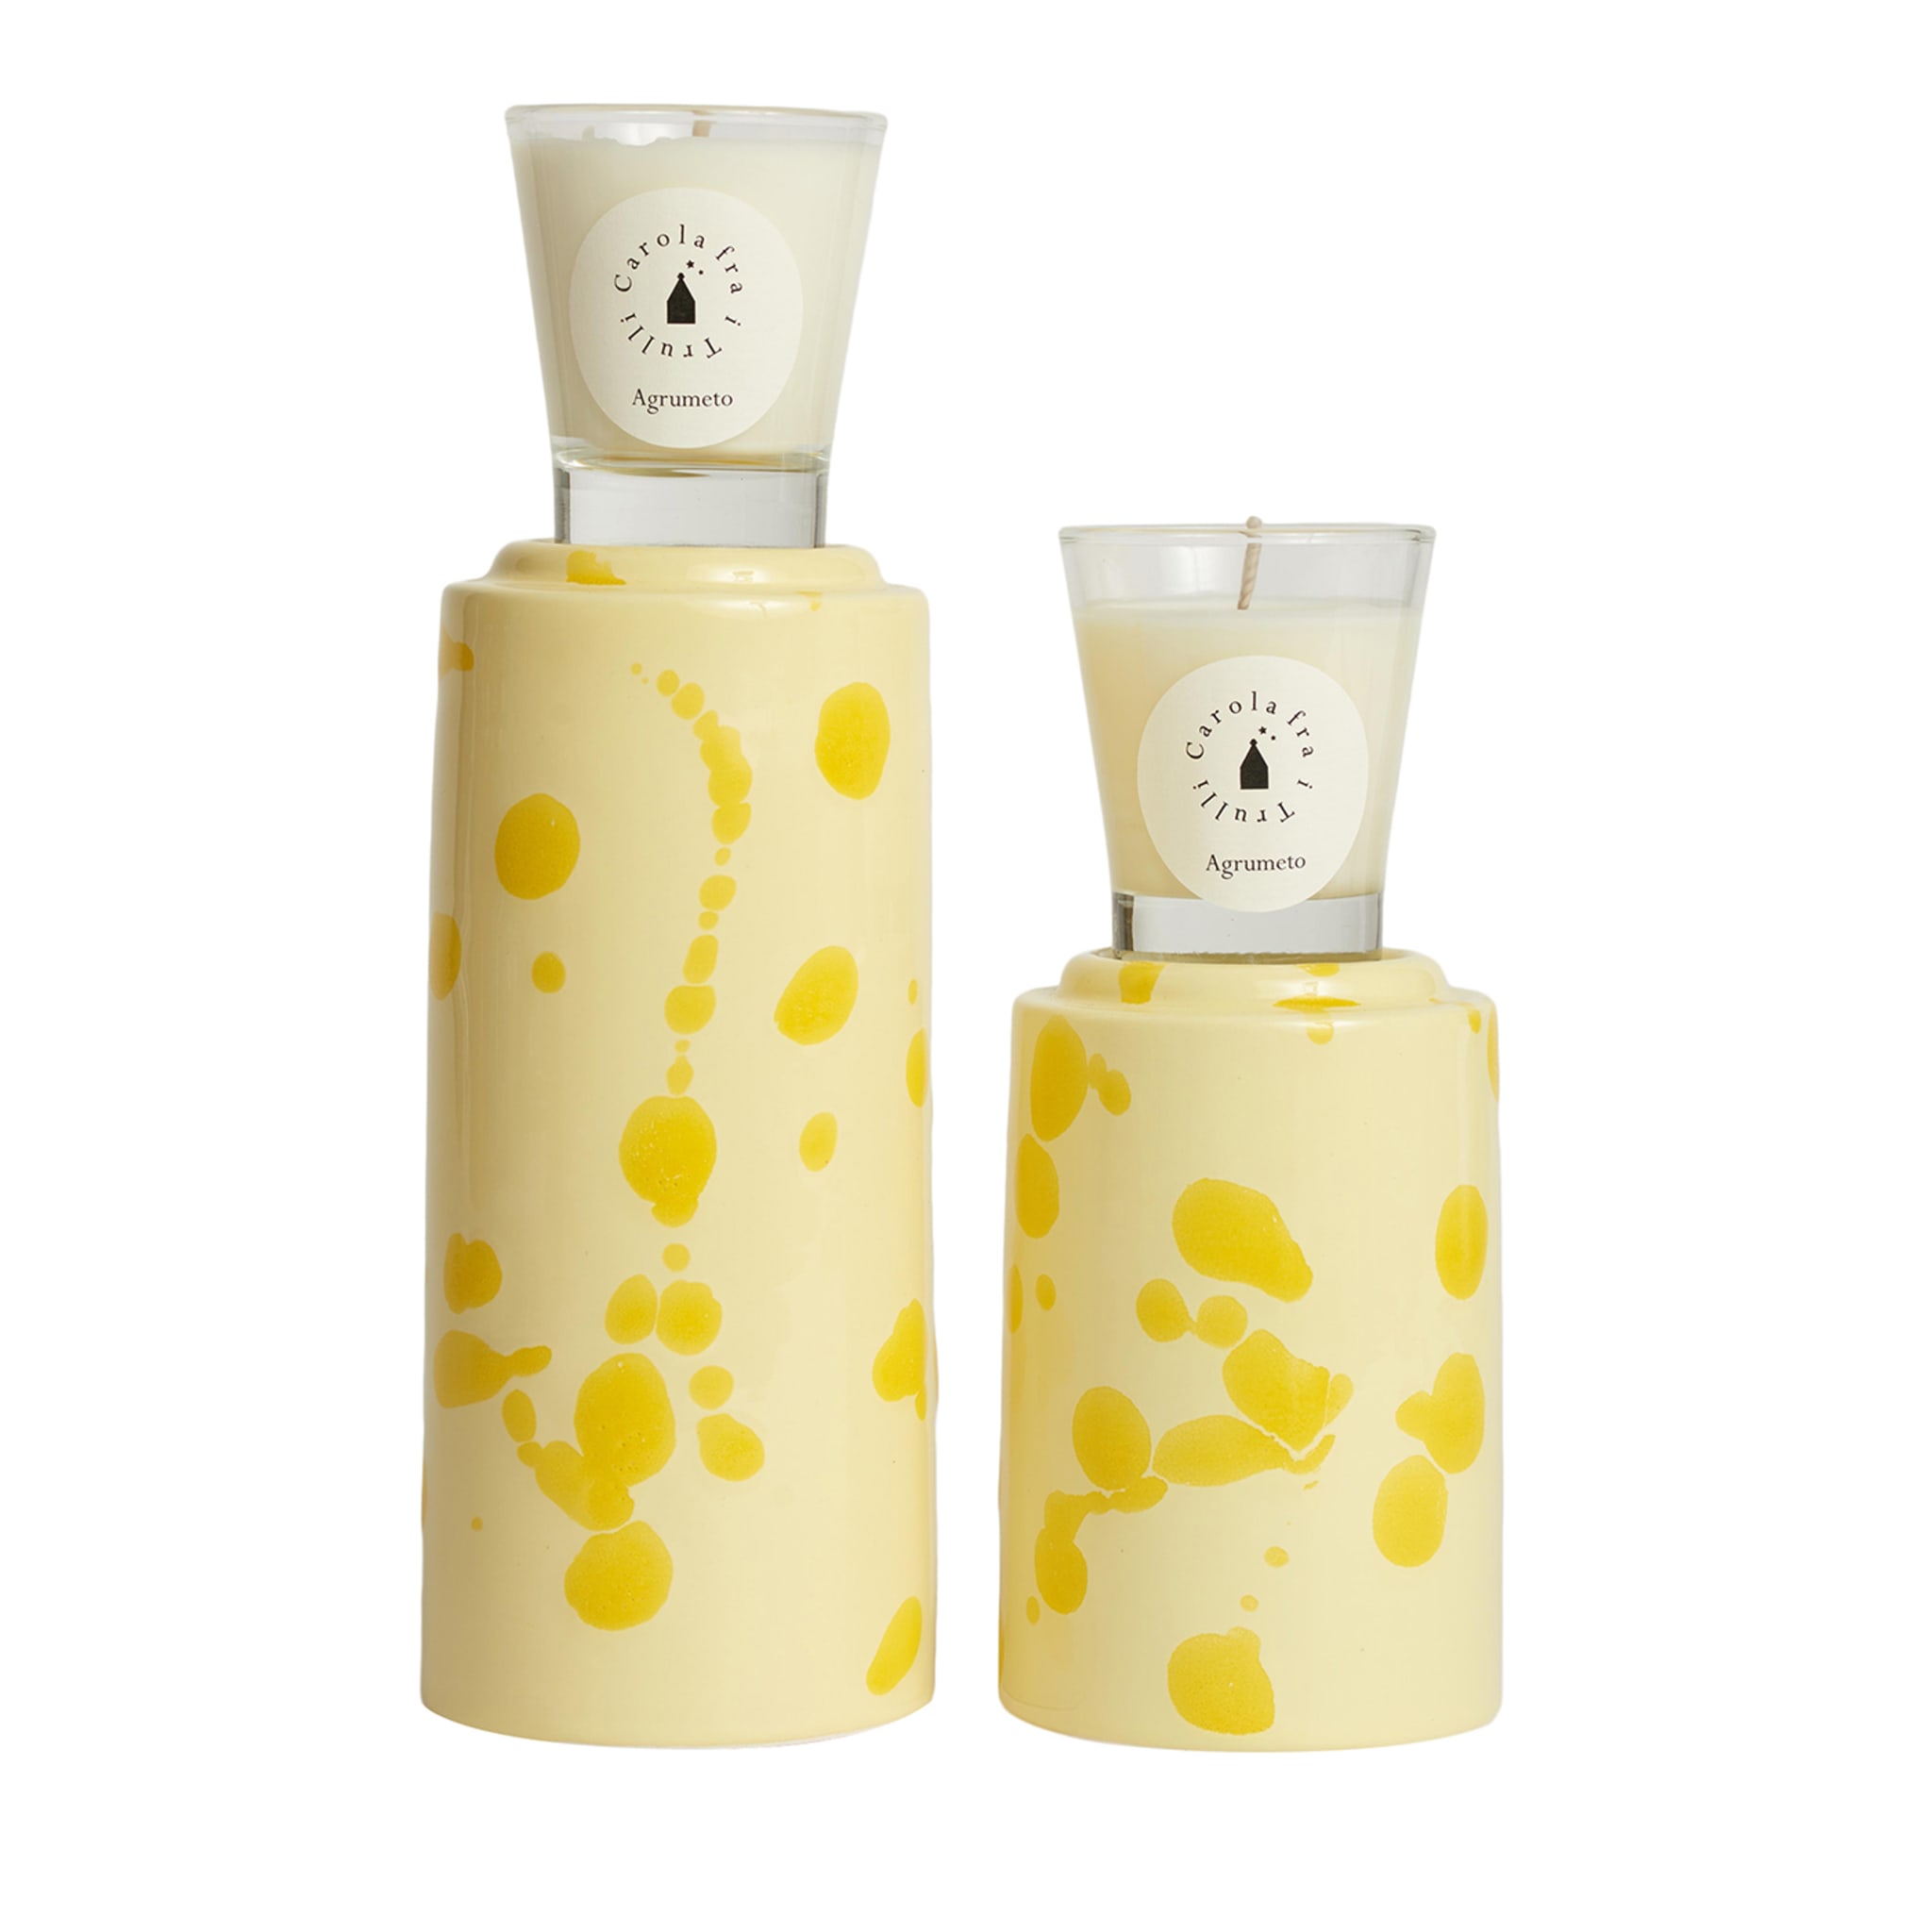 Cream and Yellow Totem with Scented Candle Fragrance Agrumeto  - Main view